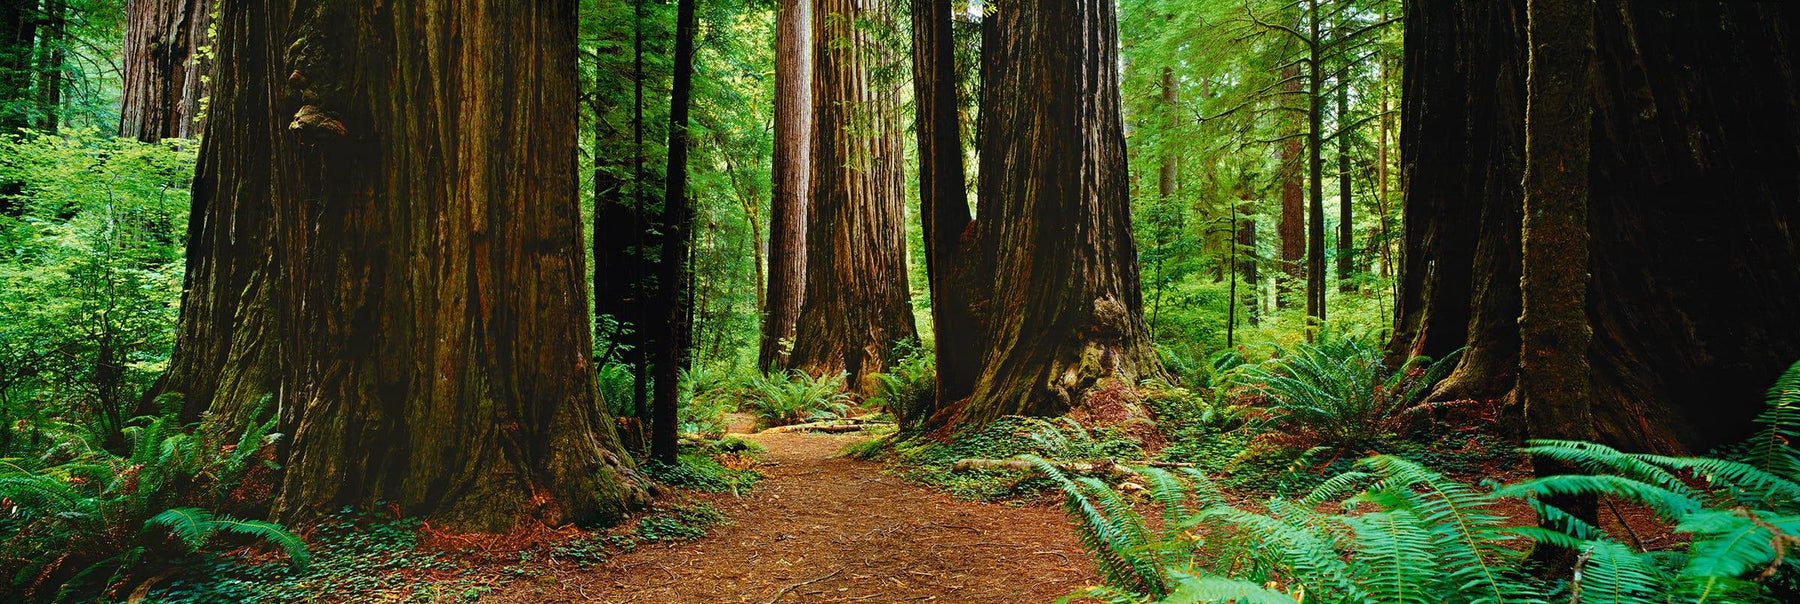 Pathway through the Giant Redwood forest in Muir Woods California